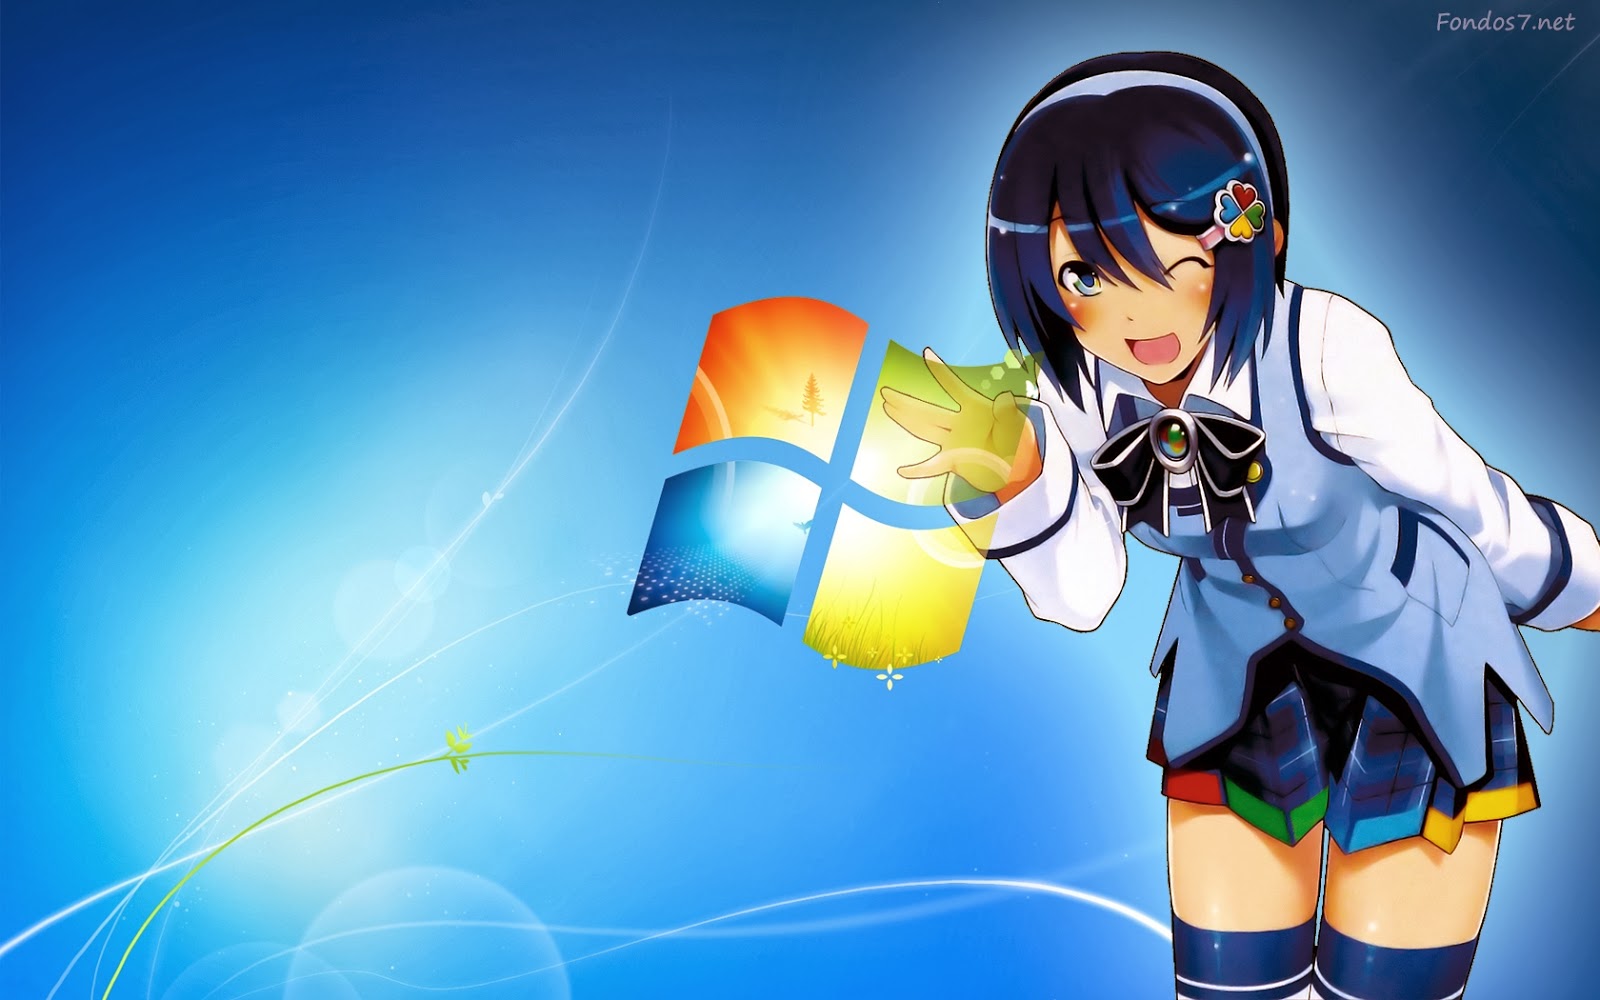 HD Anime Wallpaper Sure There Are A Lot Of Websites